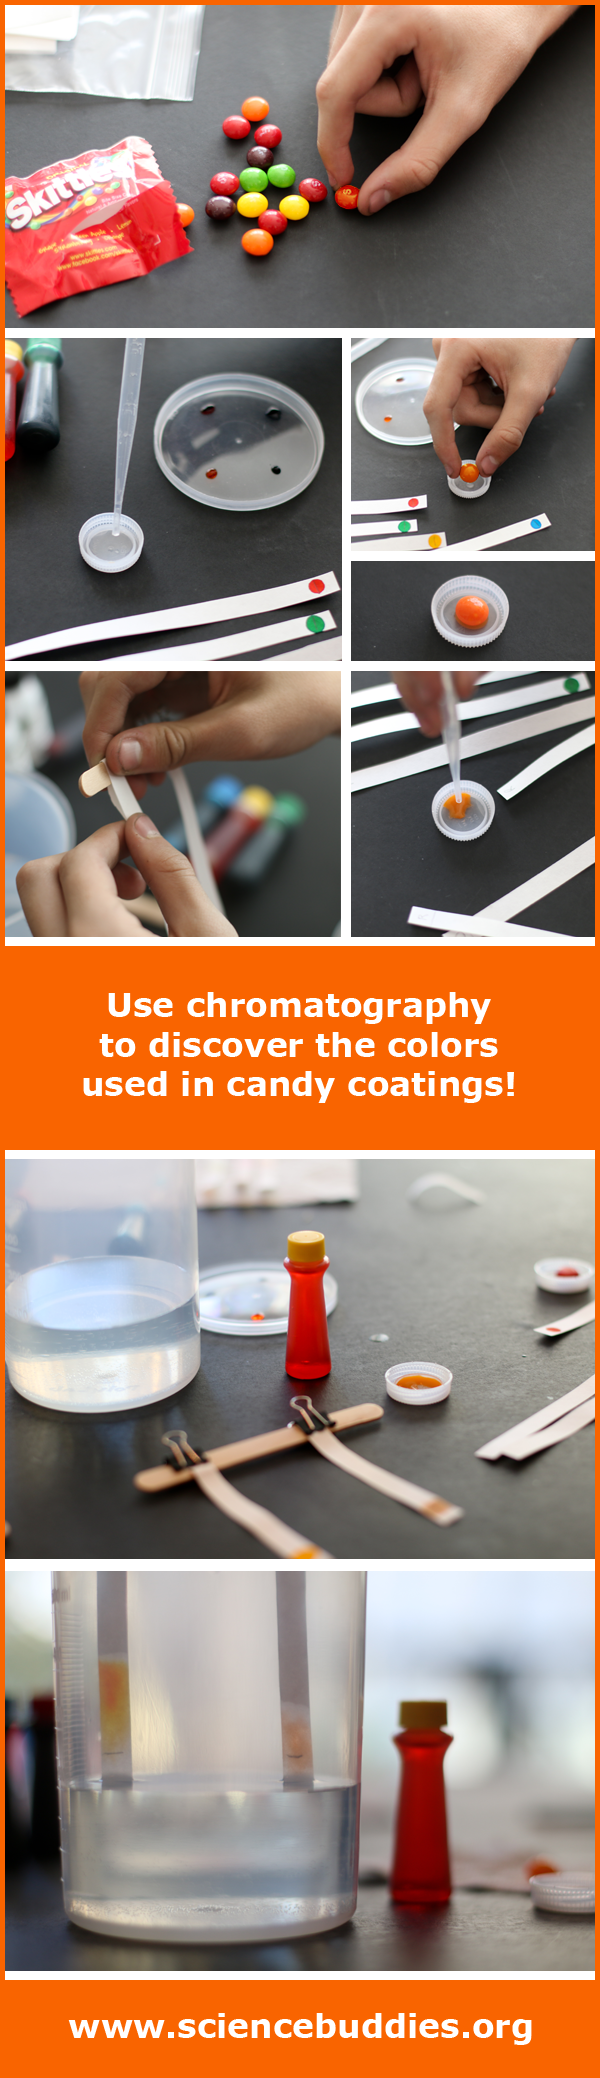 Candy Color Chromatography experiment and photos of hands-on science STEM project with kids at home / family science